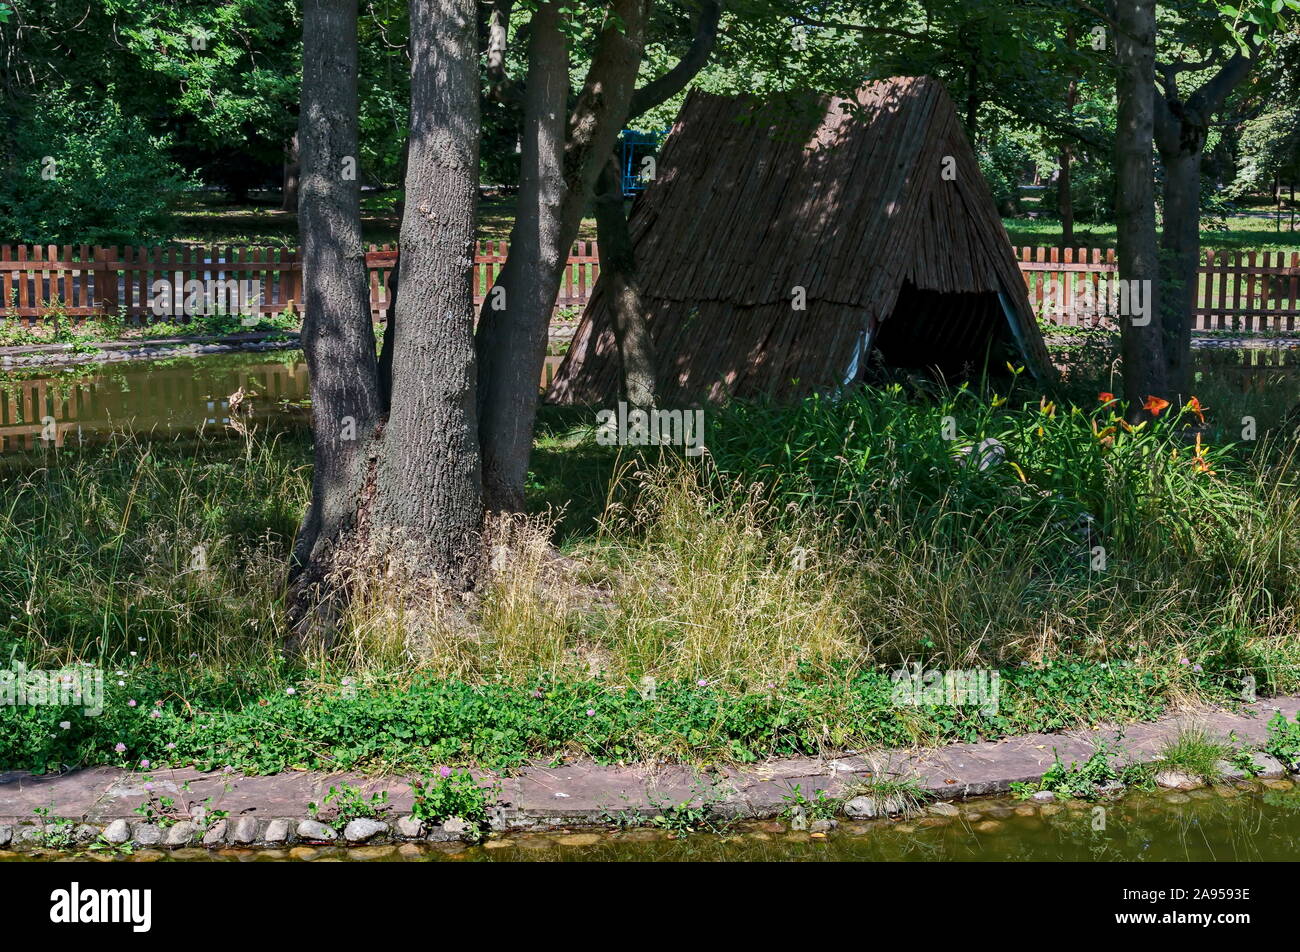 A small house built into the lake with nesting place for ducks in the city garden, Sofia, Bulgaria Stock Photo